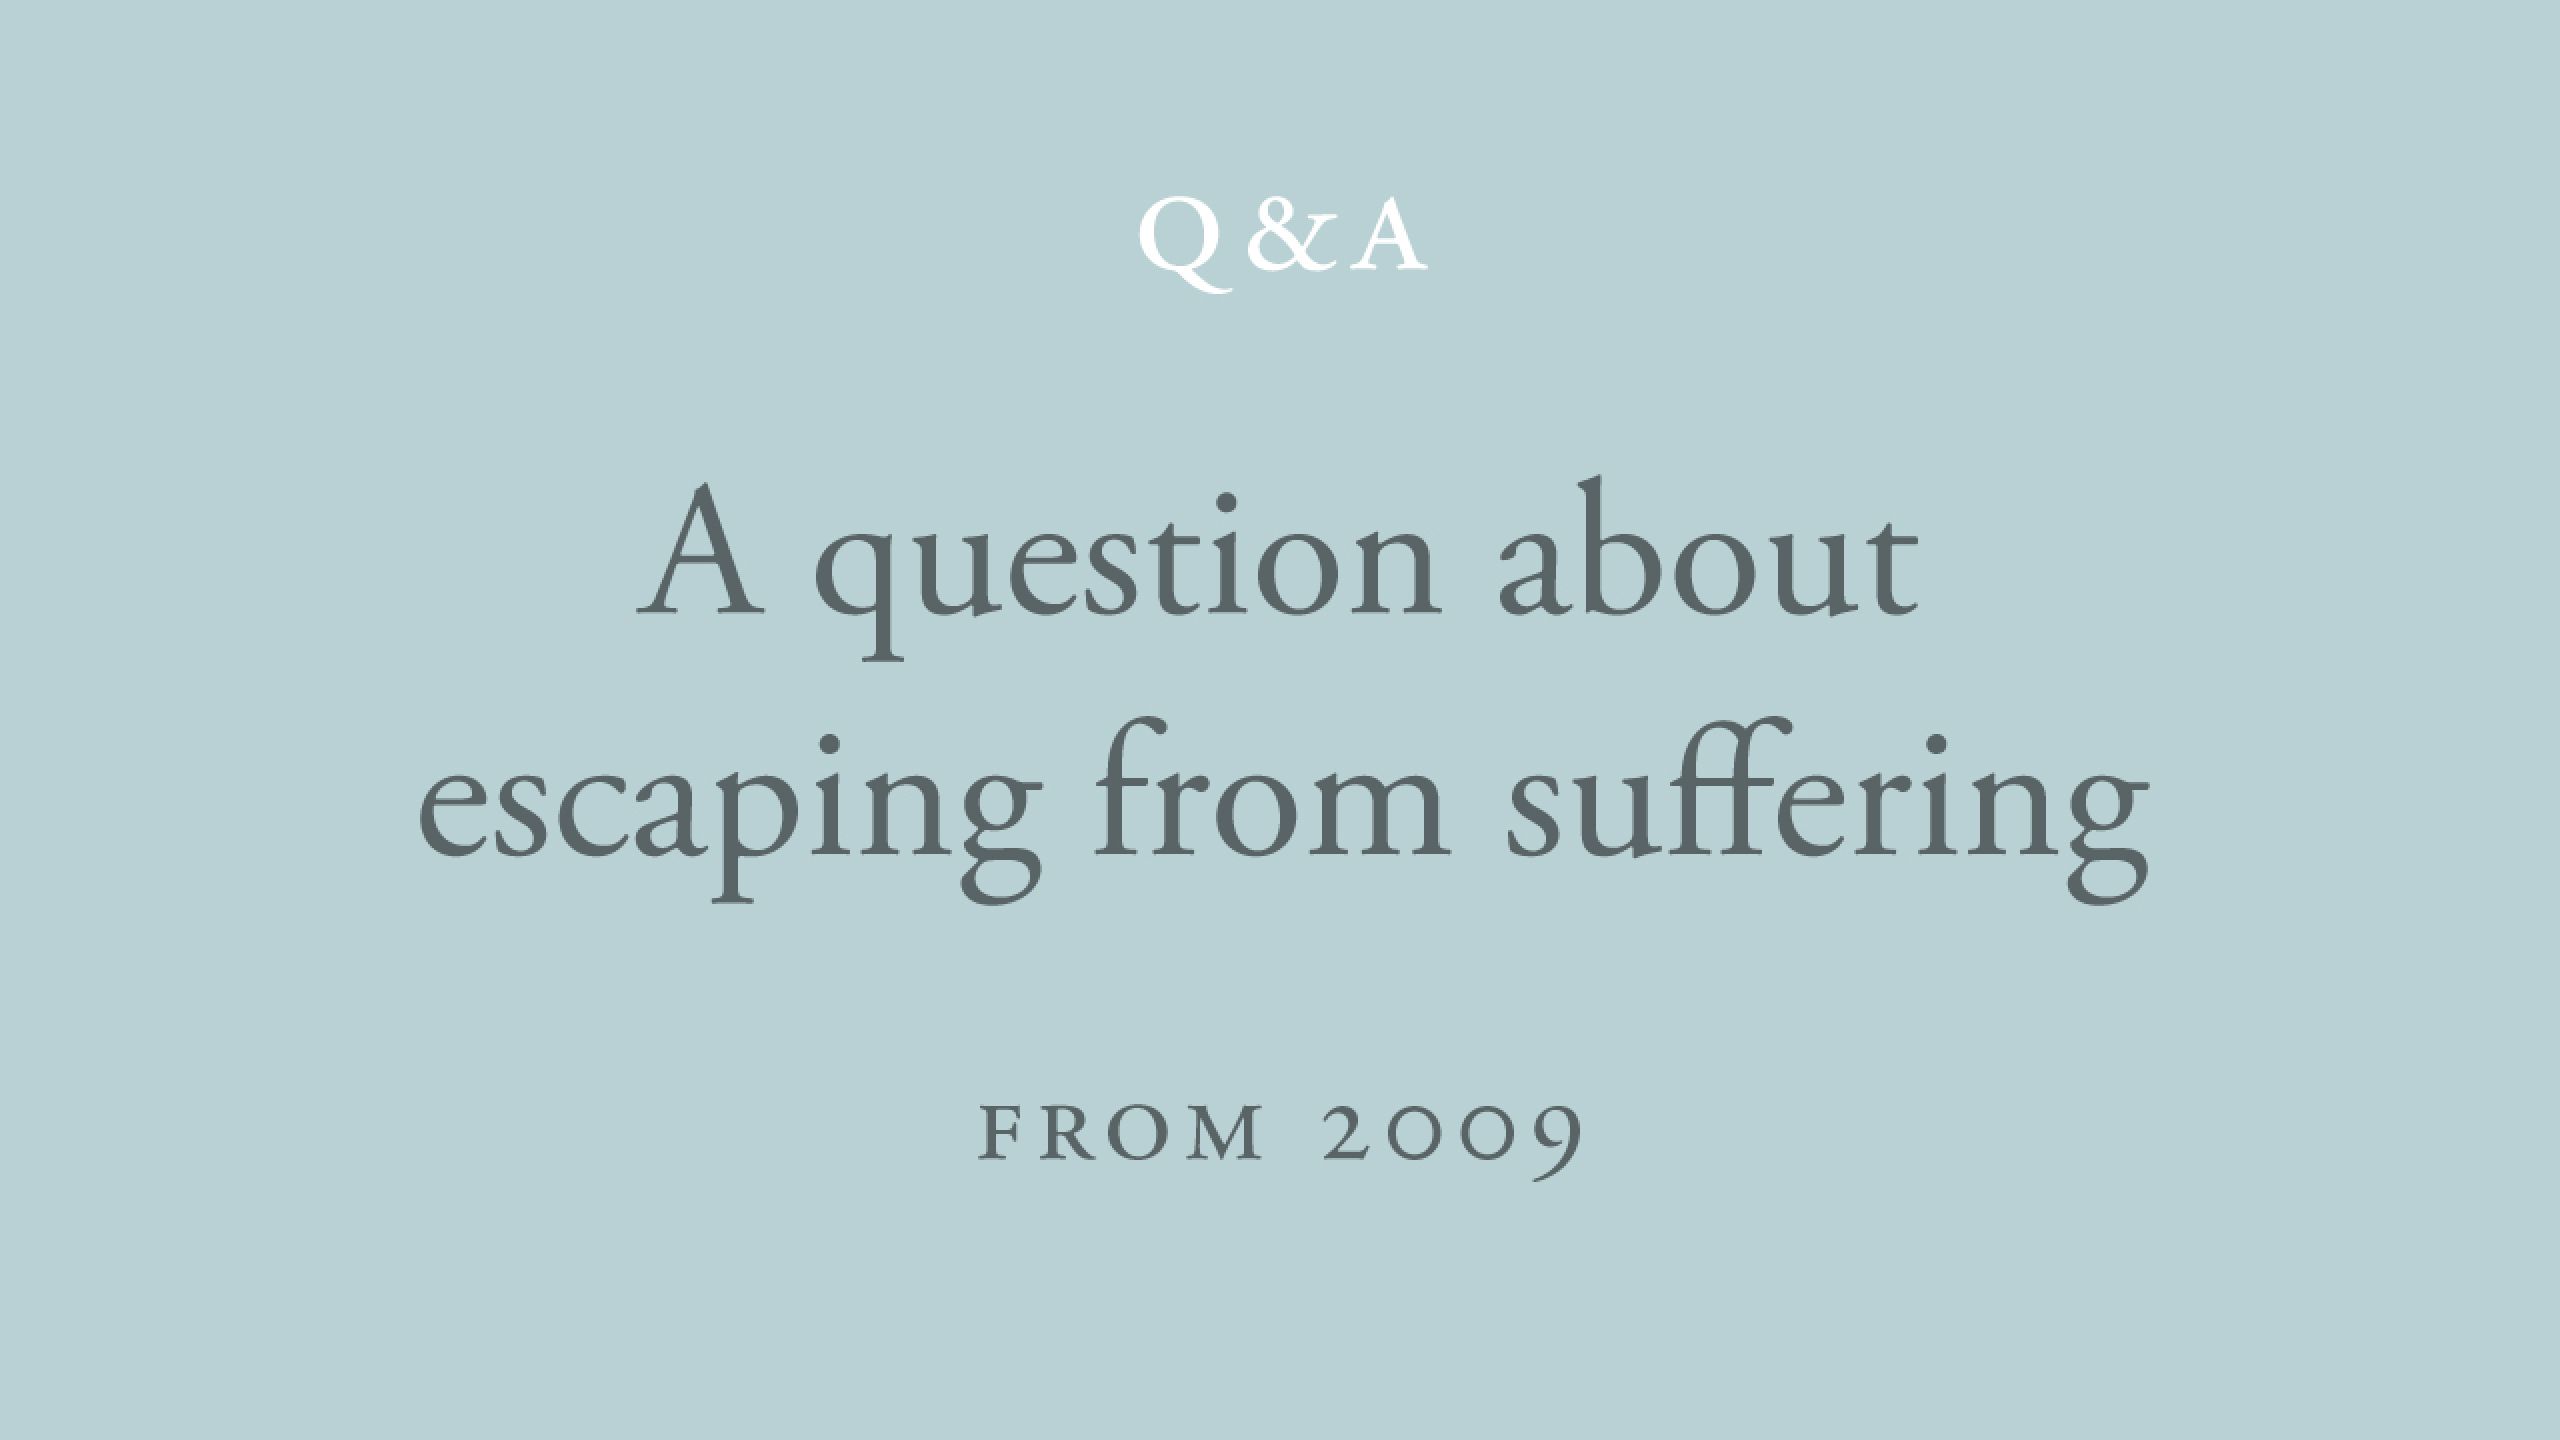 Is suffering inescapable?